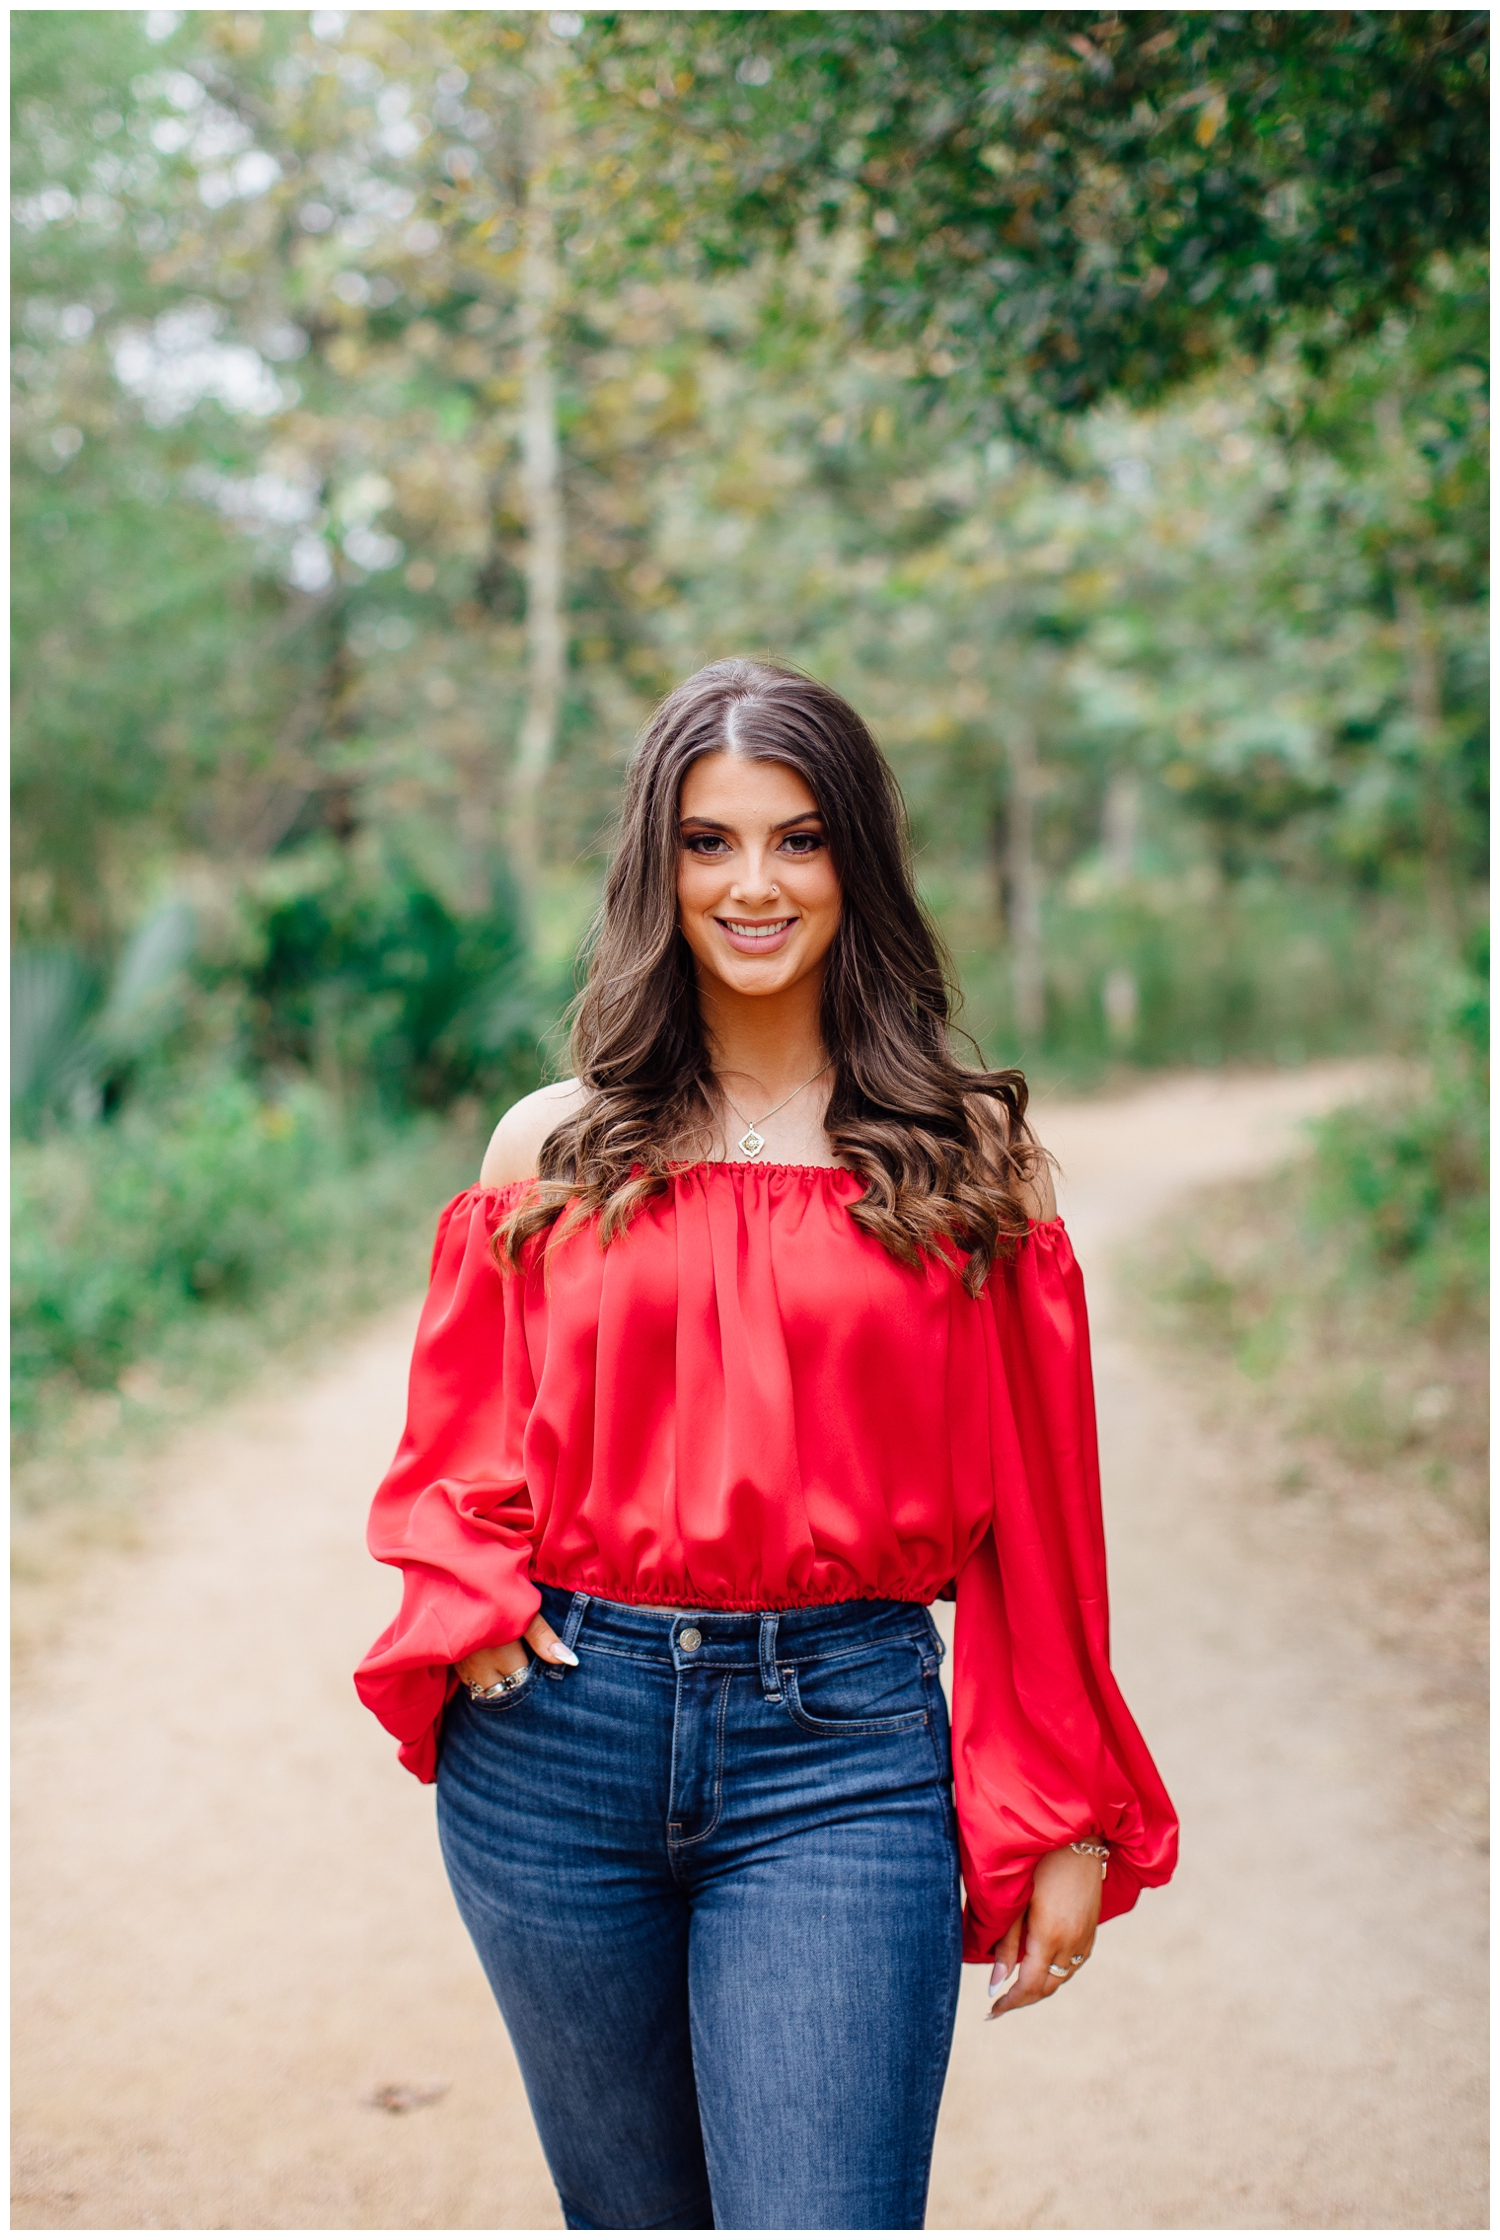 high school senior in jeans and red blouse smiling for bold senior portraits in Houston Arboretum